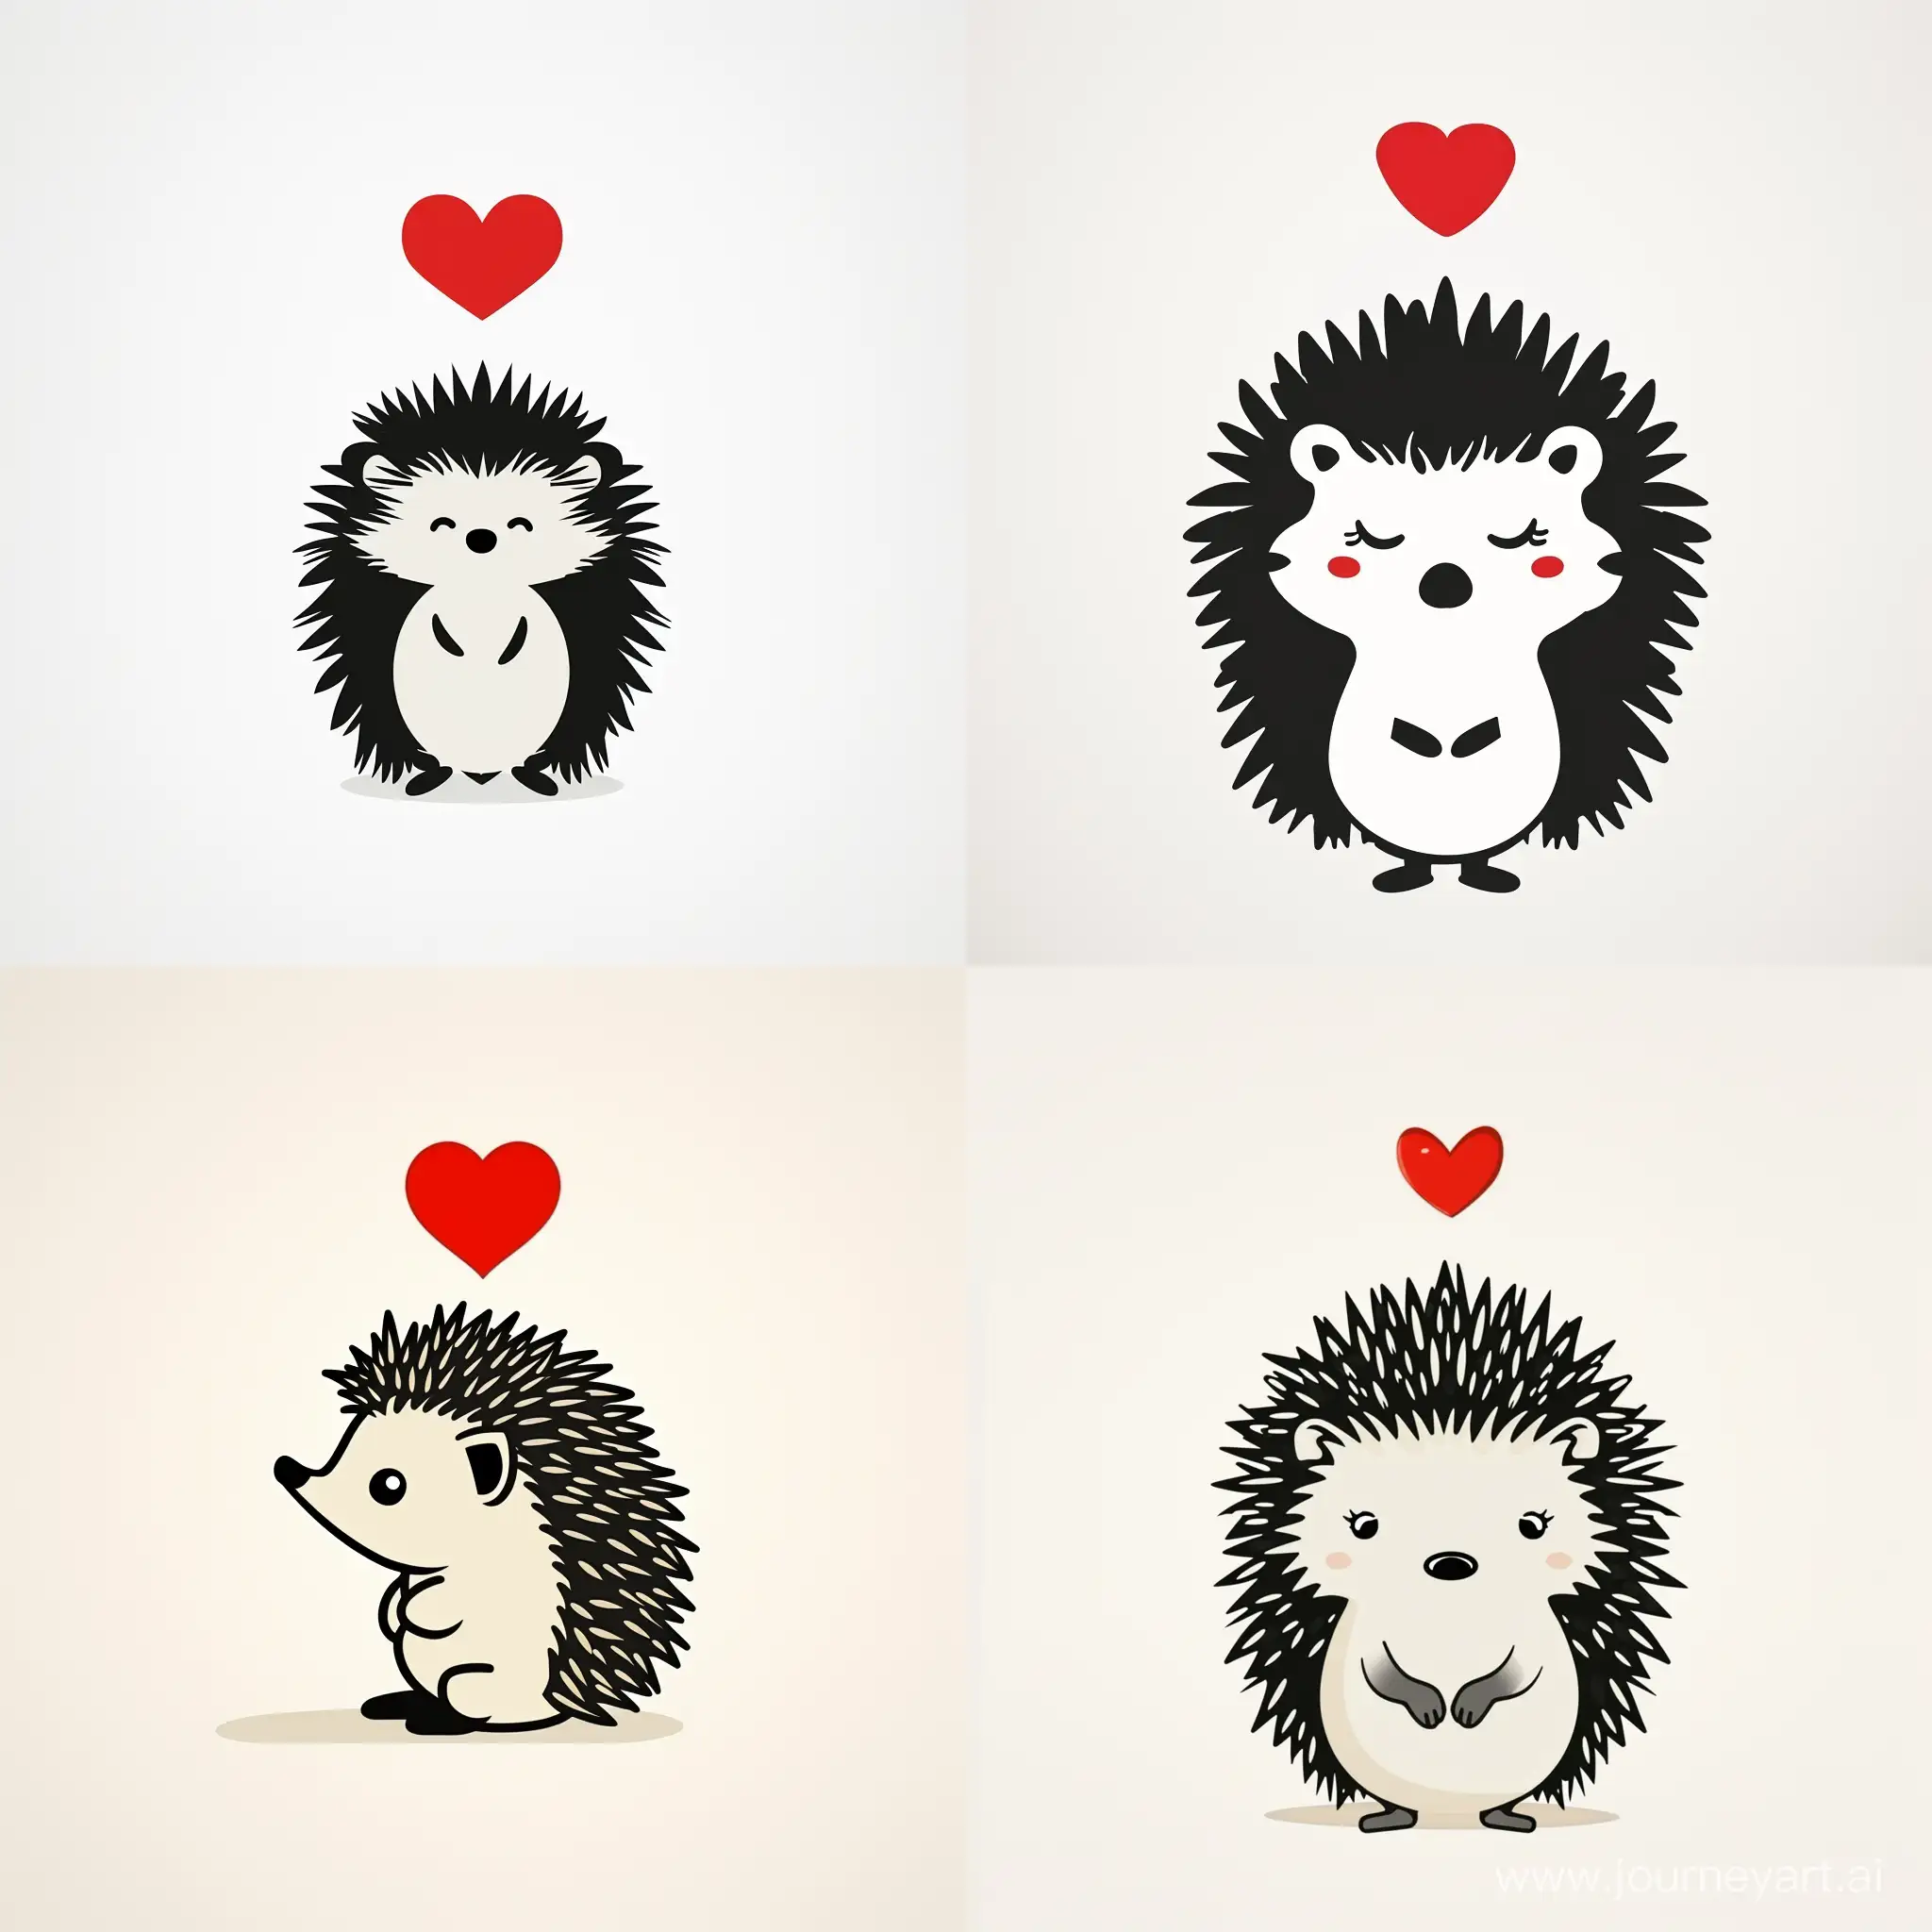 Cute minimalistic cartoon hedgehog on a white background, with a red heart above its head